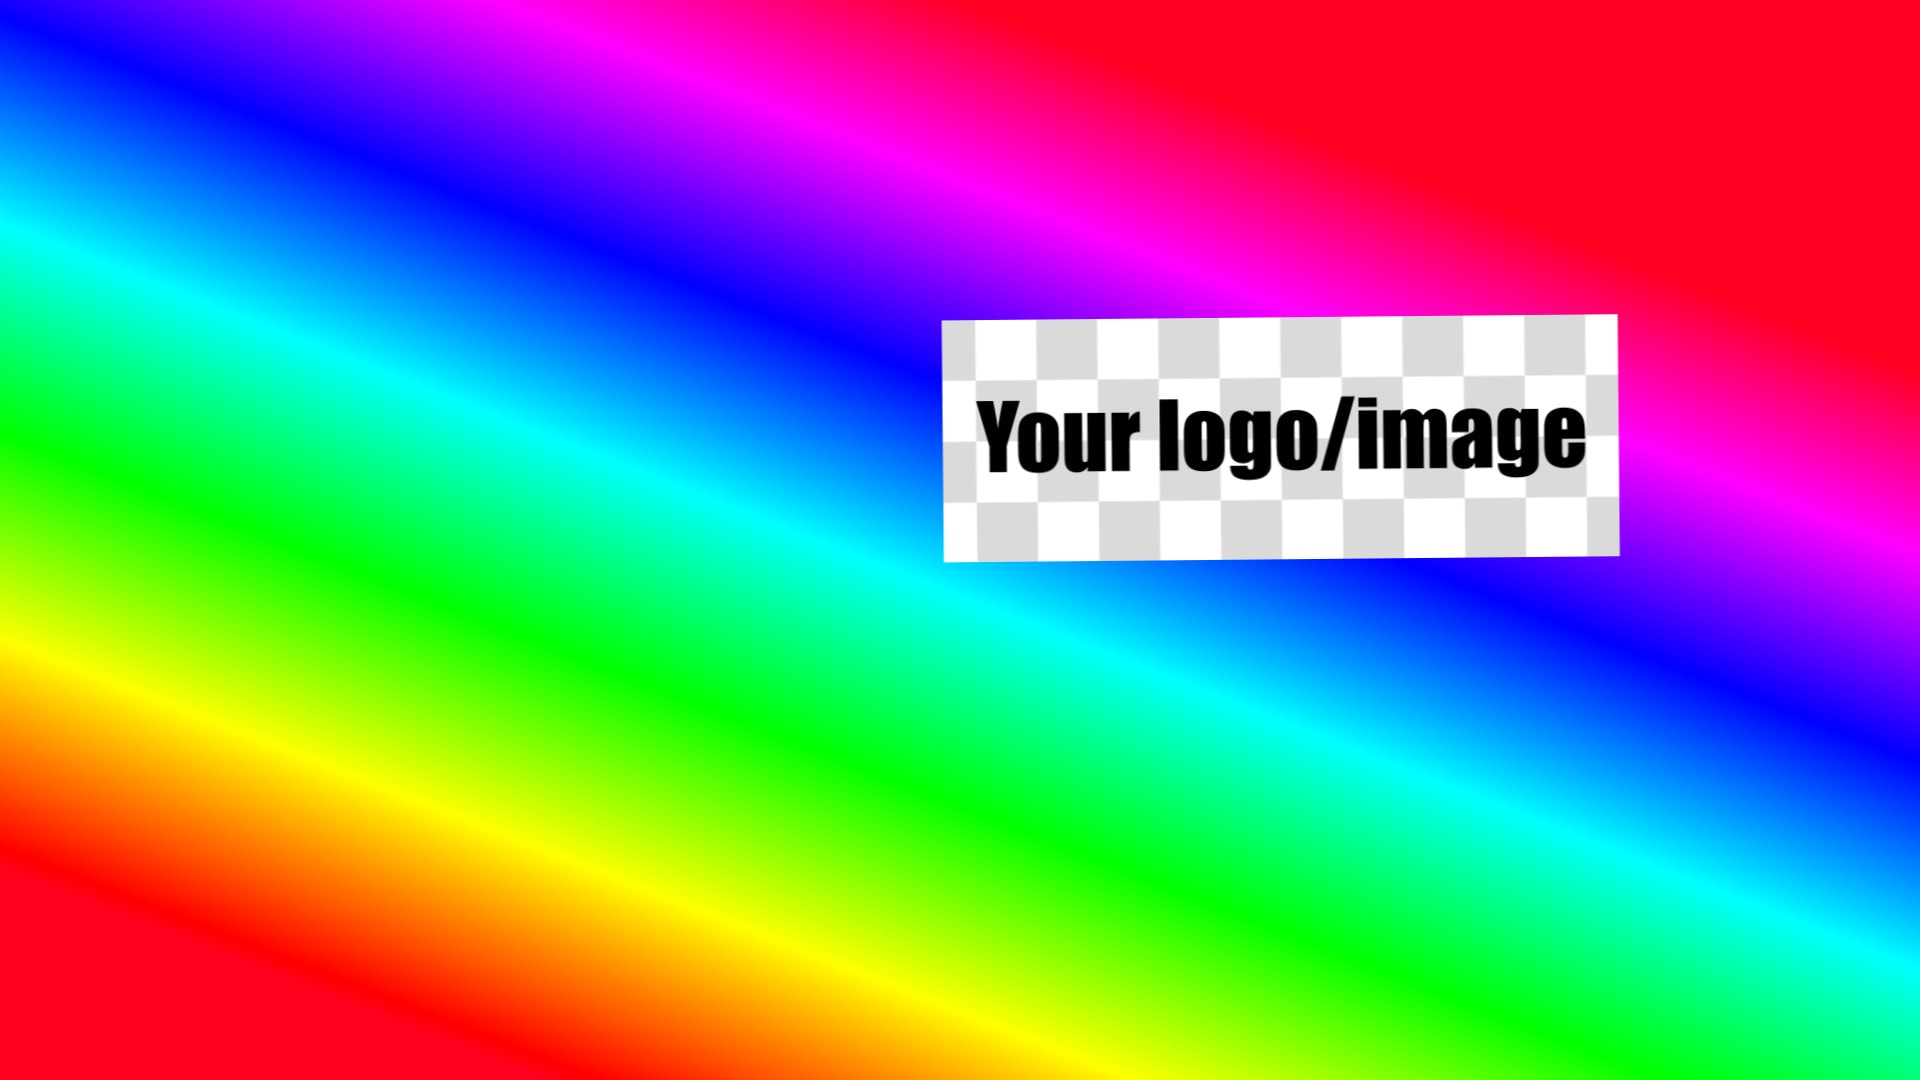 Animate your logo like a dvd screensaver by Ksquared